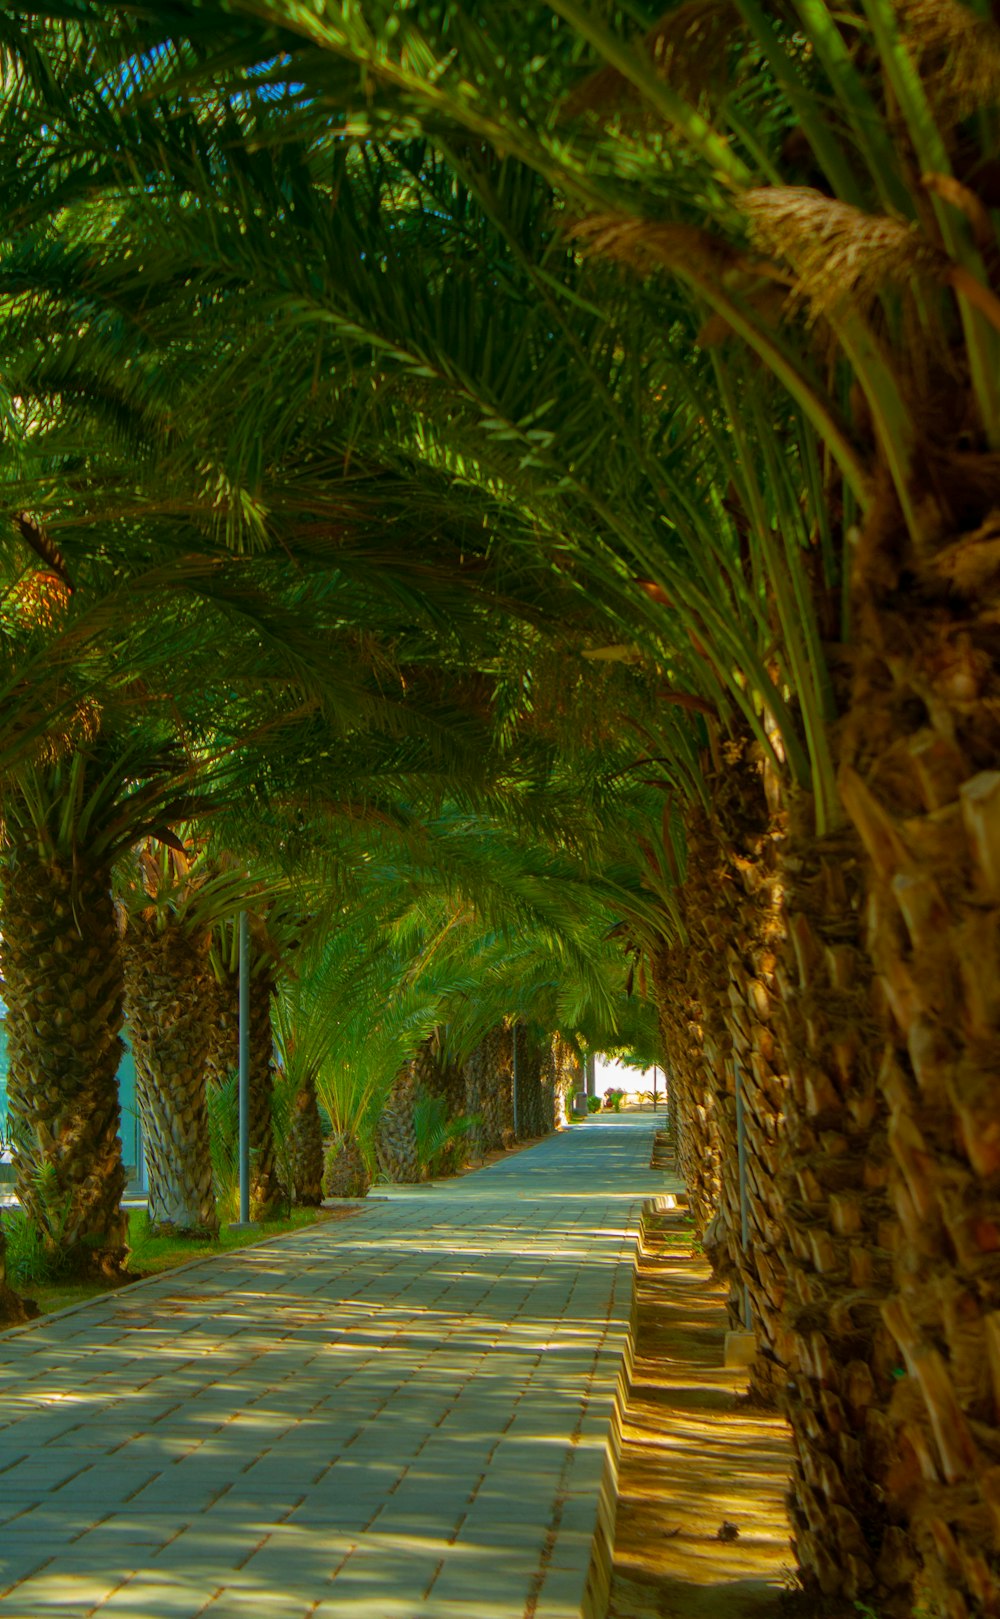 a sidewalk lined with palm trees next to the ocean